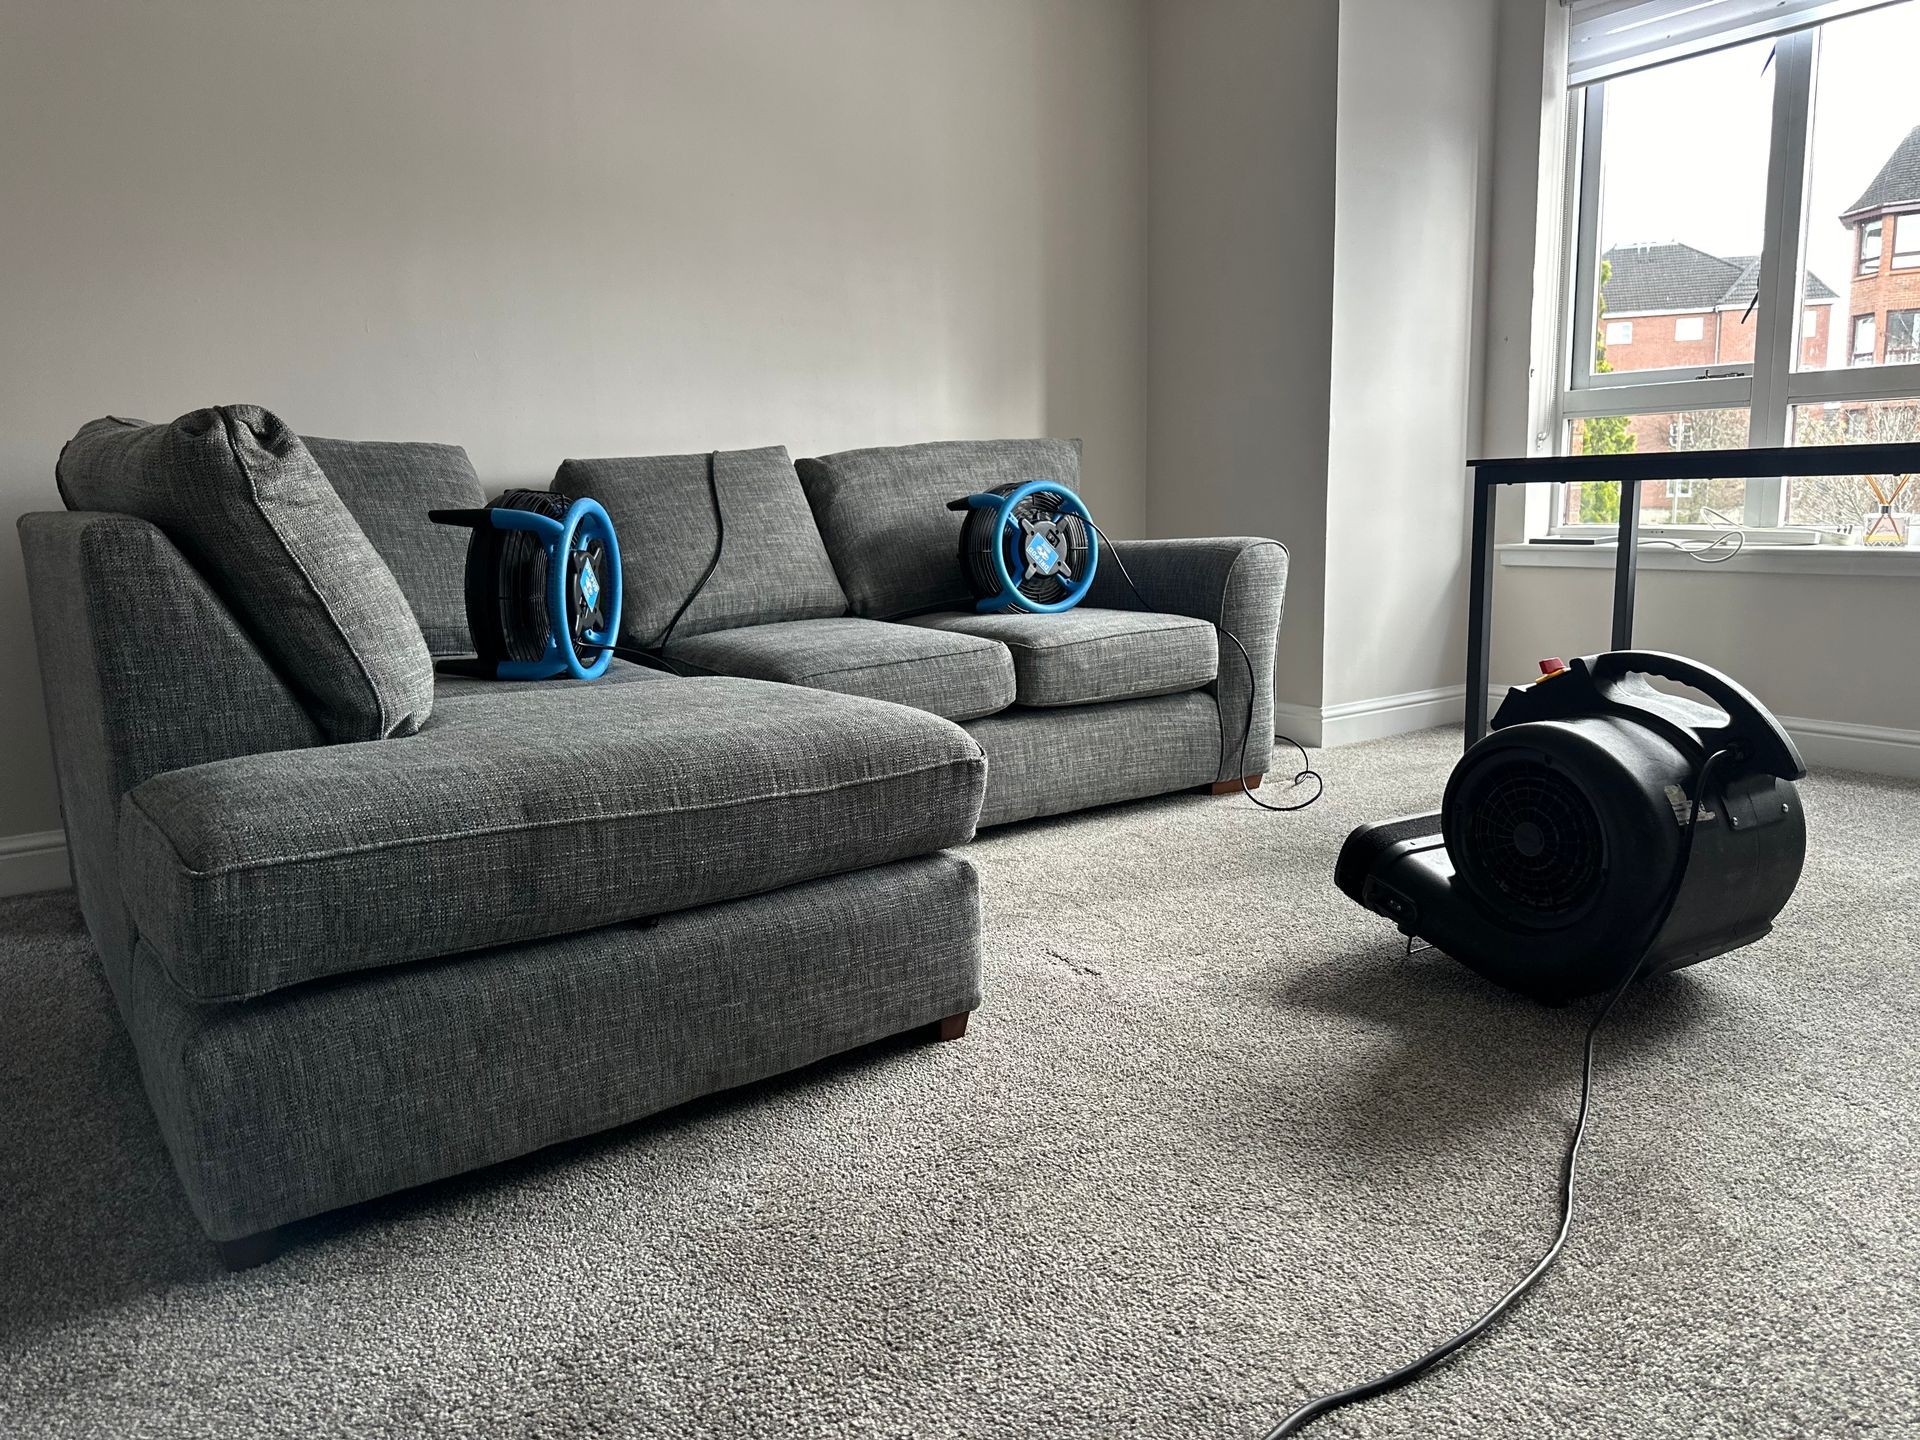 Upholstery, sofa, couch cleaning Glasgow Glasgow sofa cleaner 